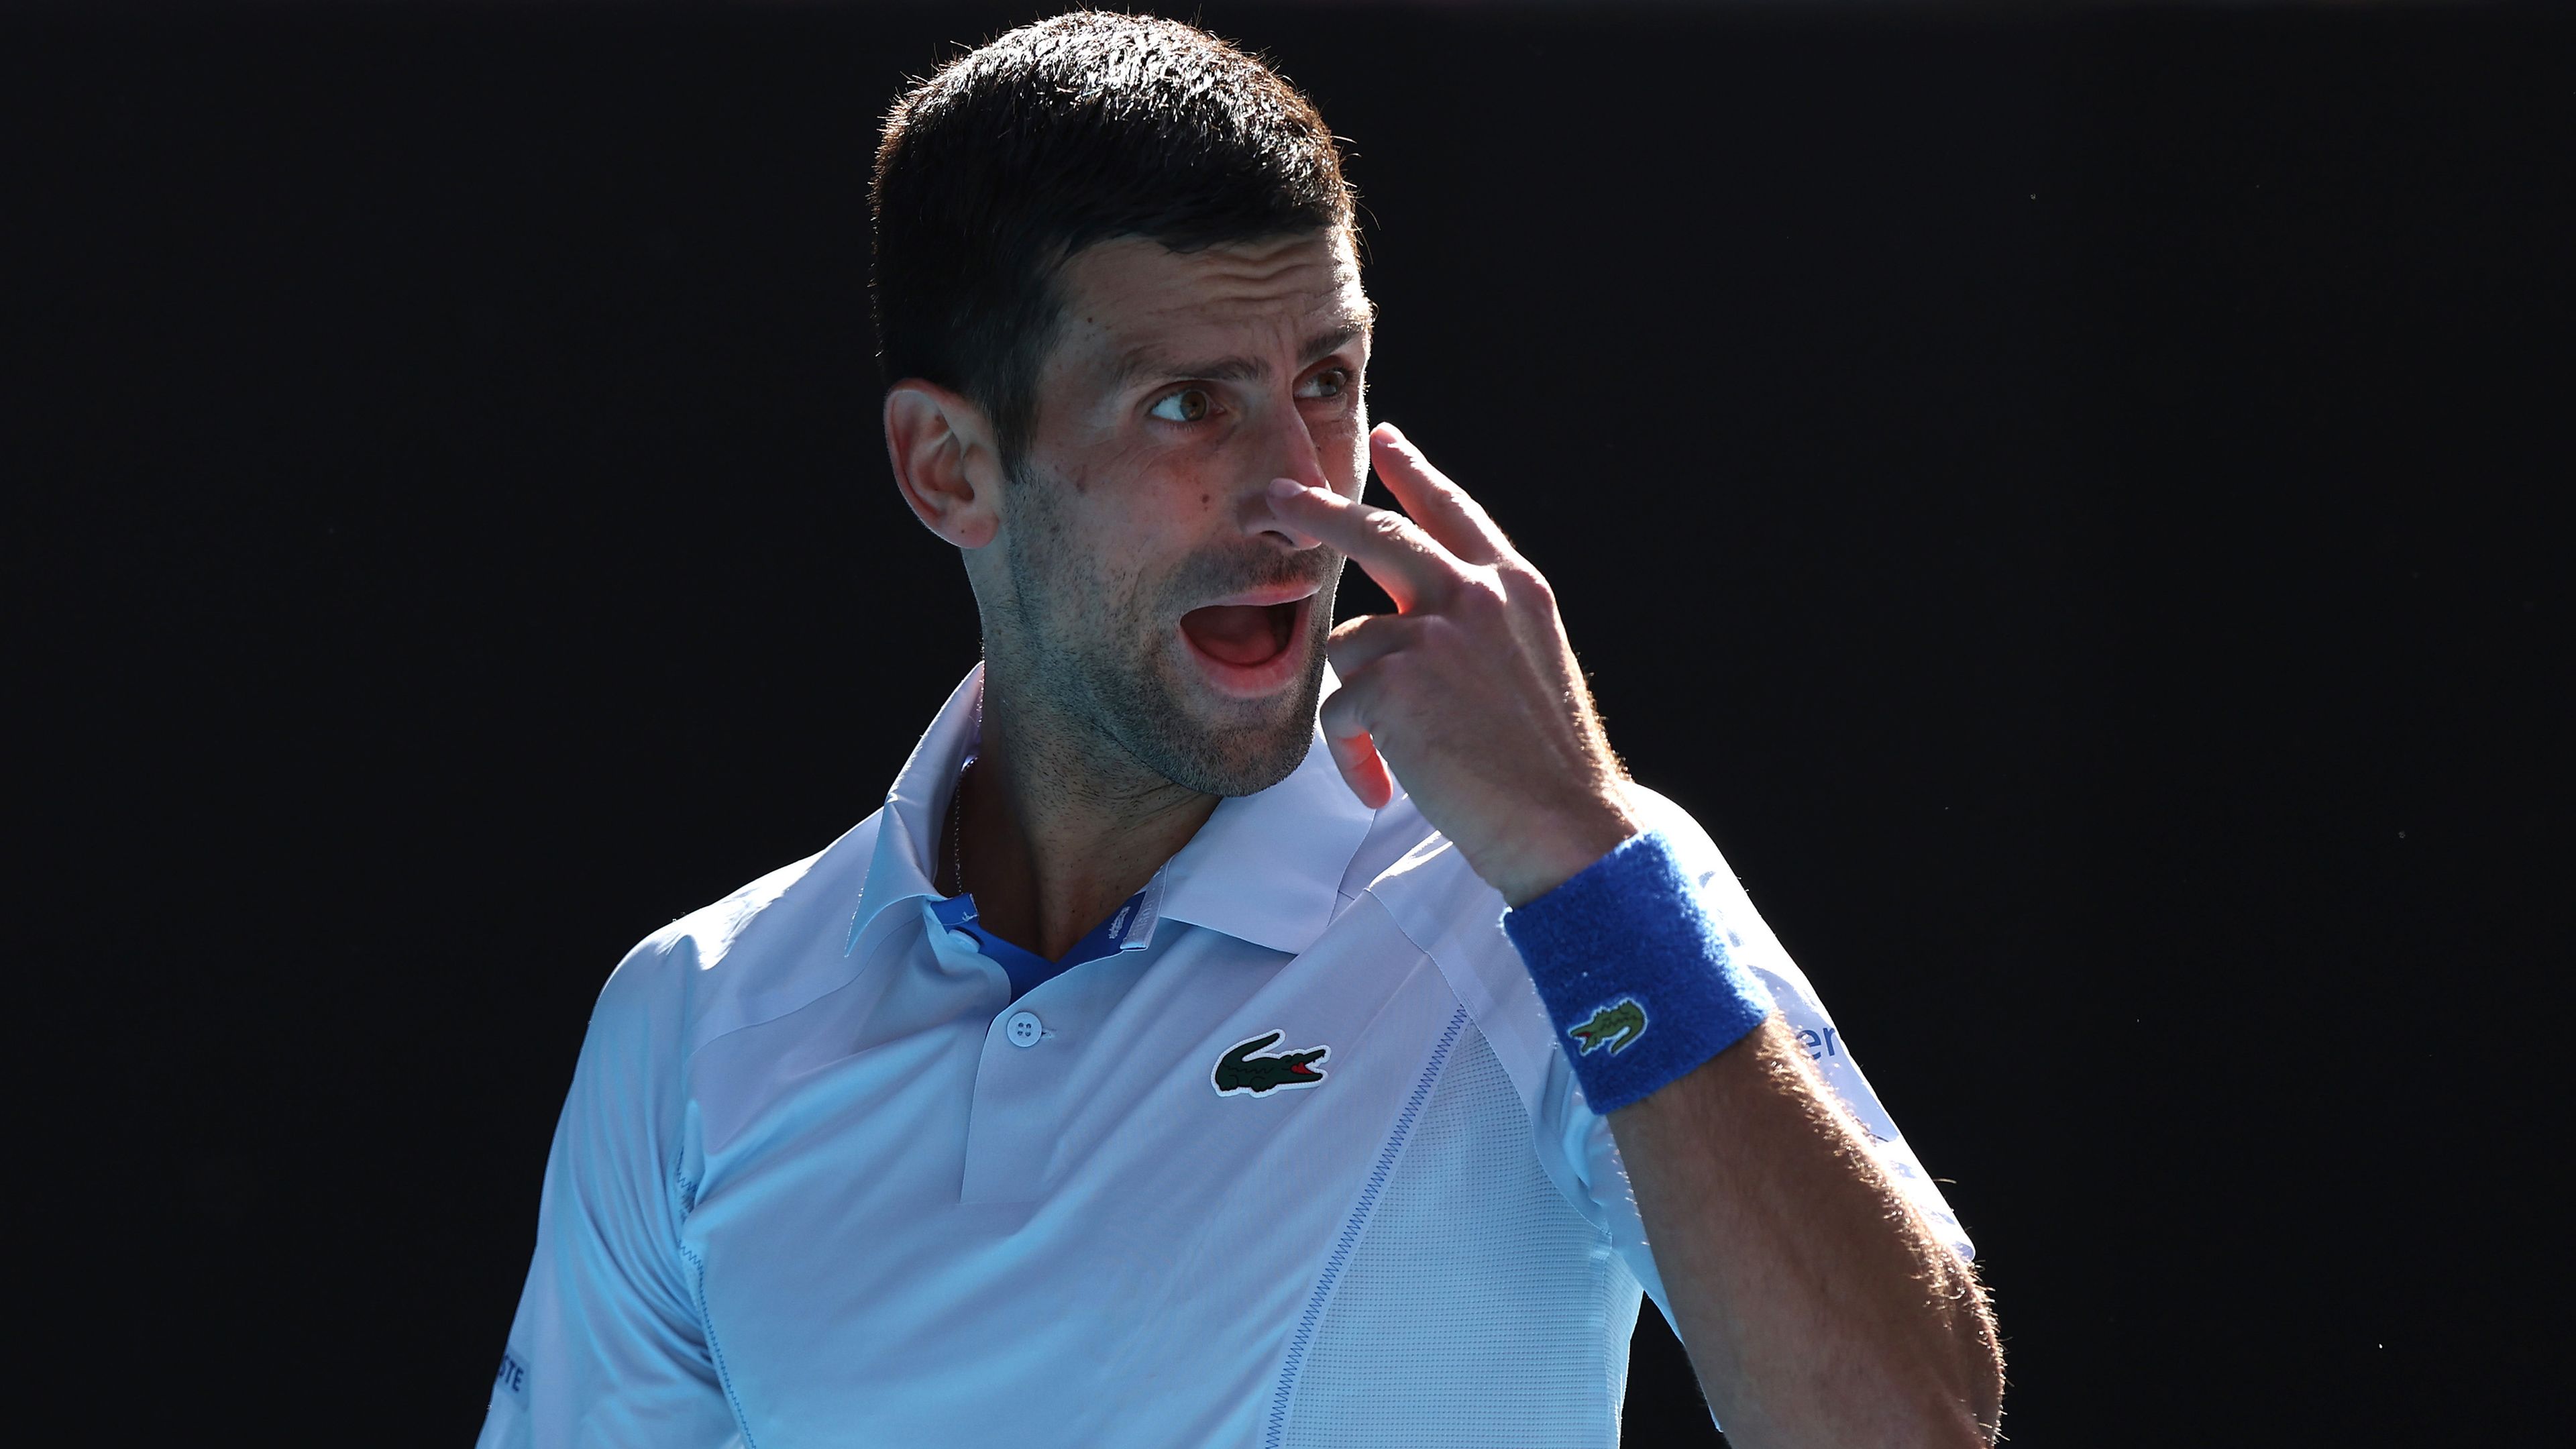 Novak Djokovic's return to top American event confirmed after COVID-19 lockout